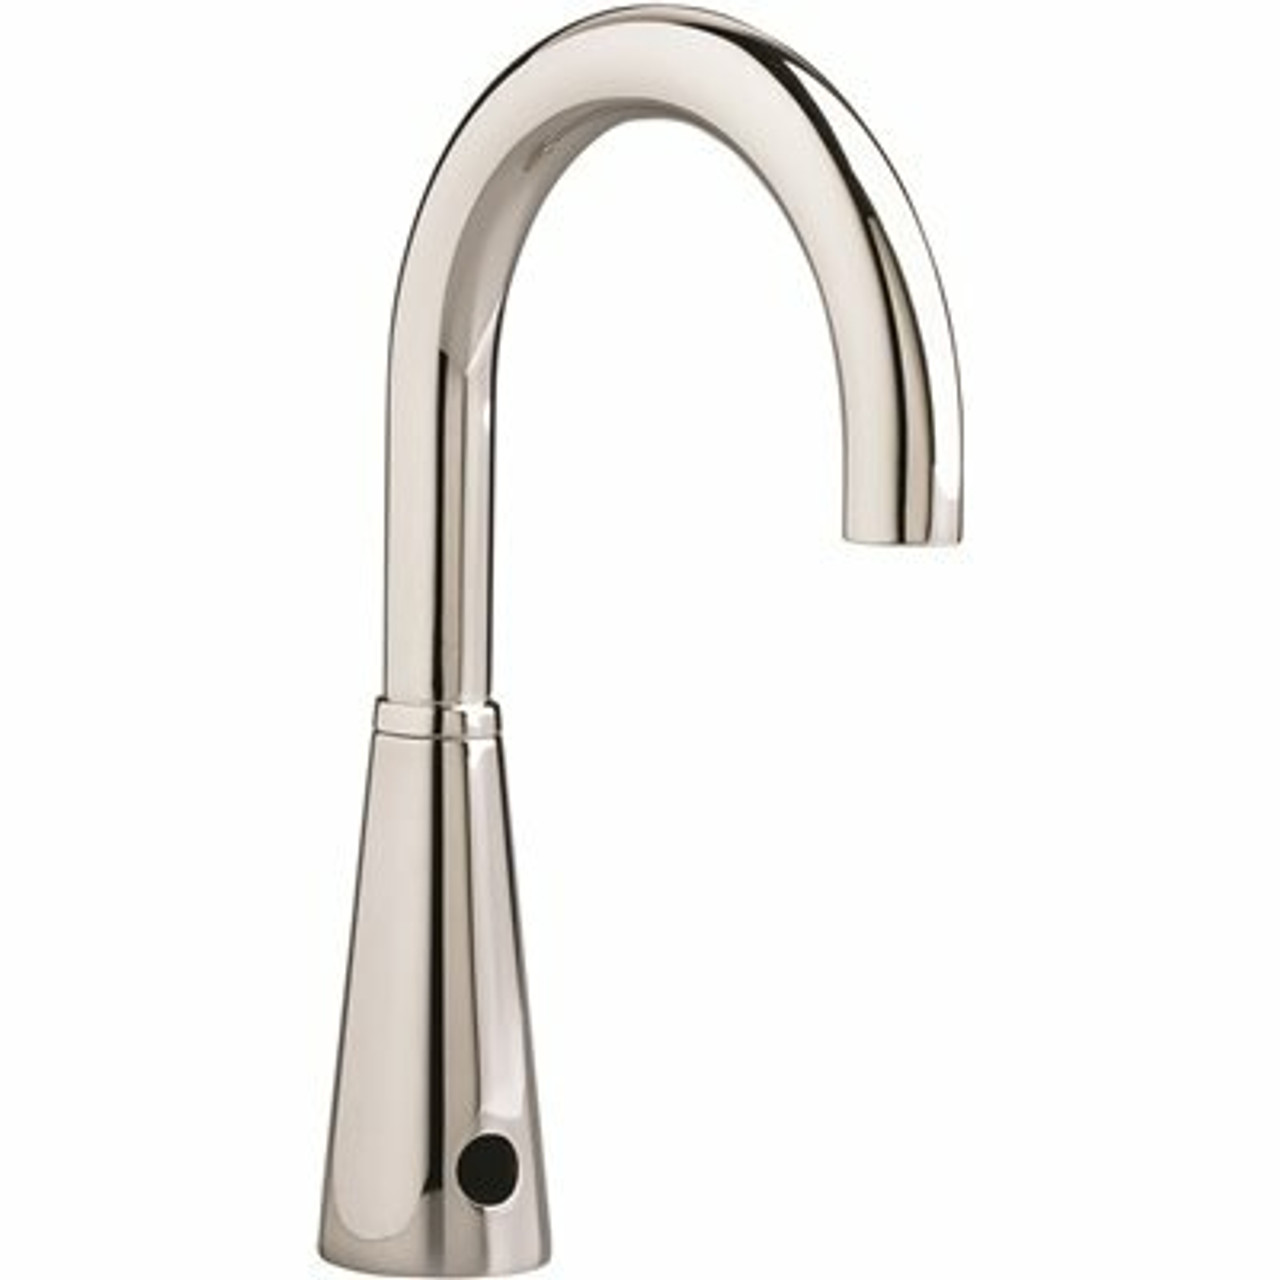 American Standard Selectronic Single Hole Touchless Bathroom Faucet With Gooseneck Spout In Chrome